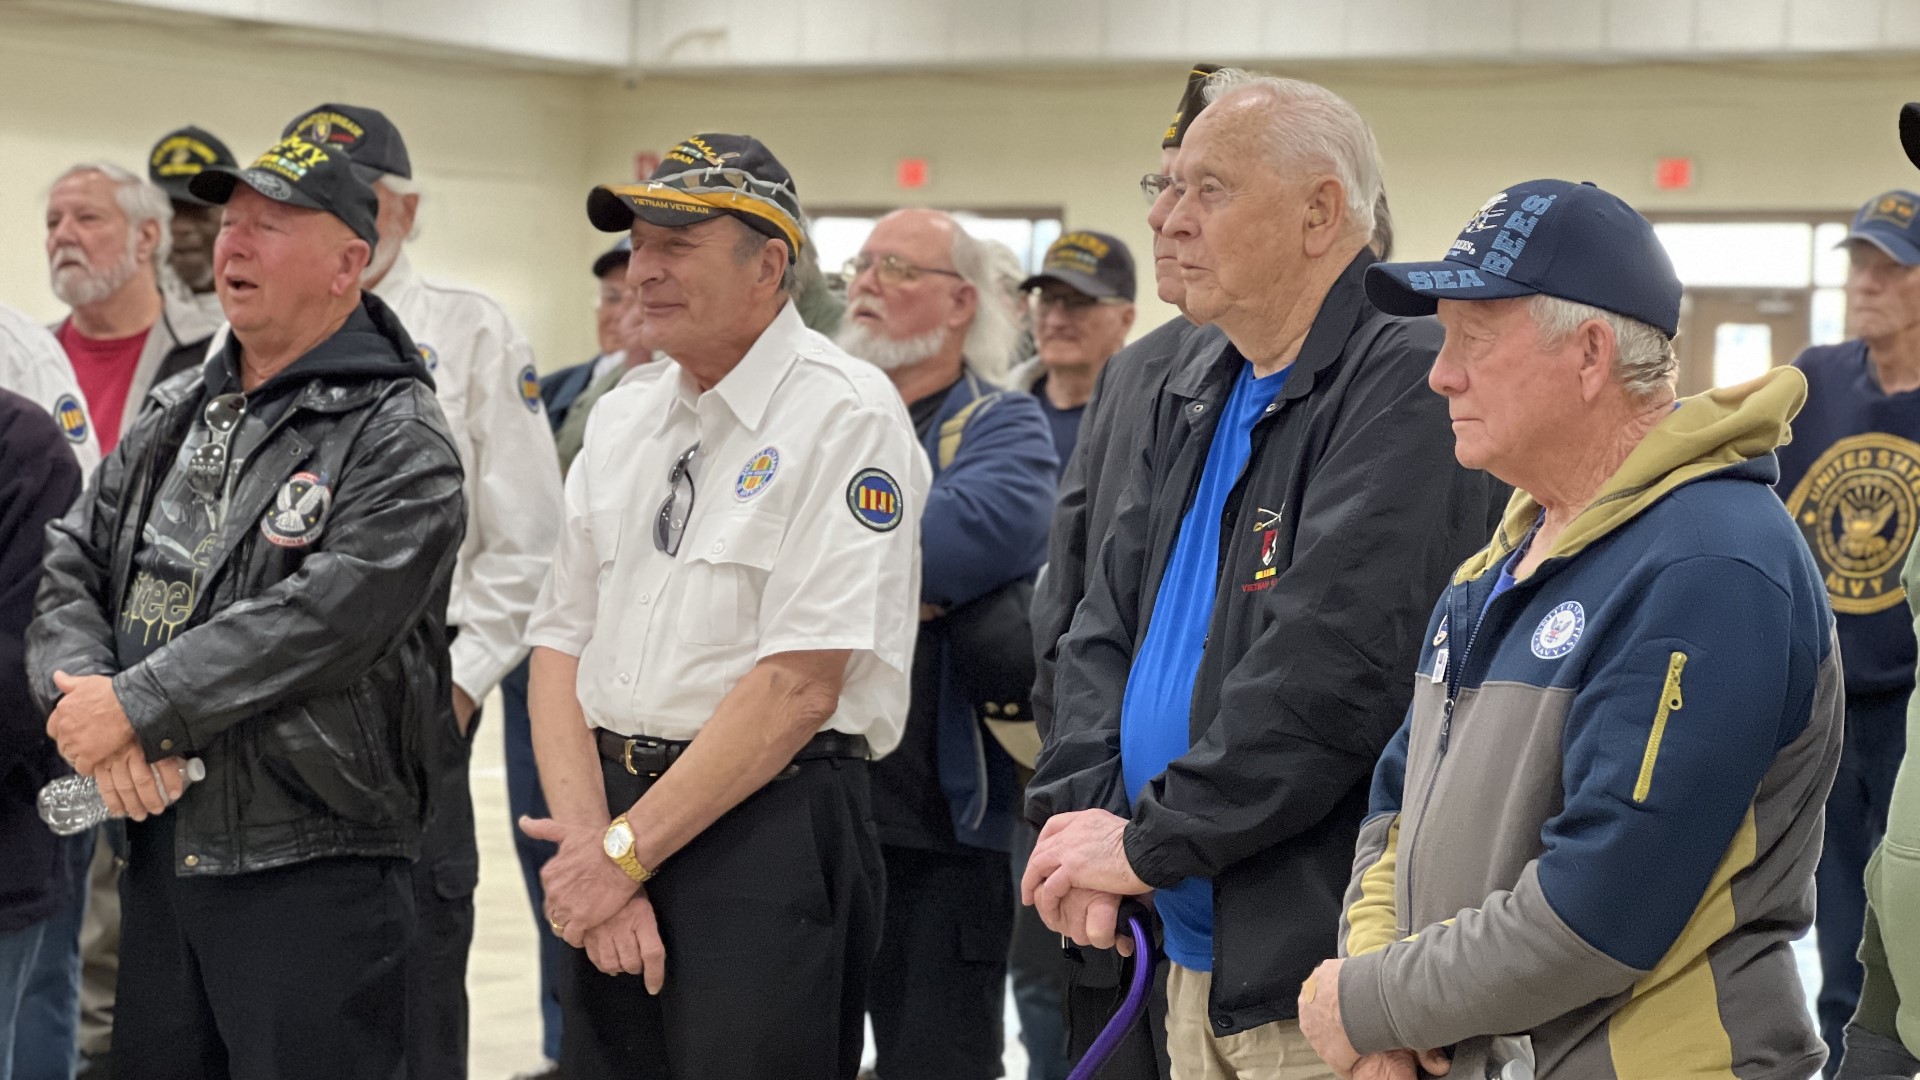 The Vietnam Veterans of America White Rose Chapter has celebrated on March 29 since 2017.